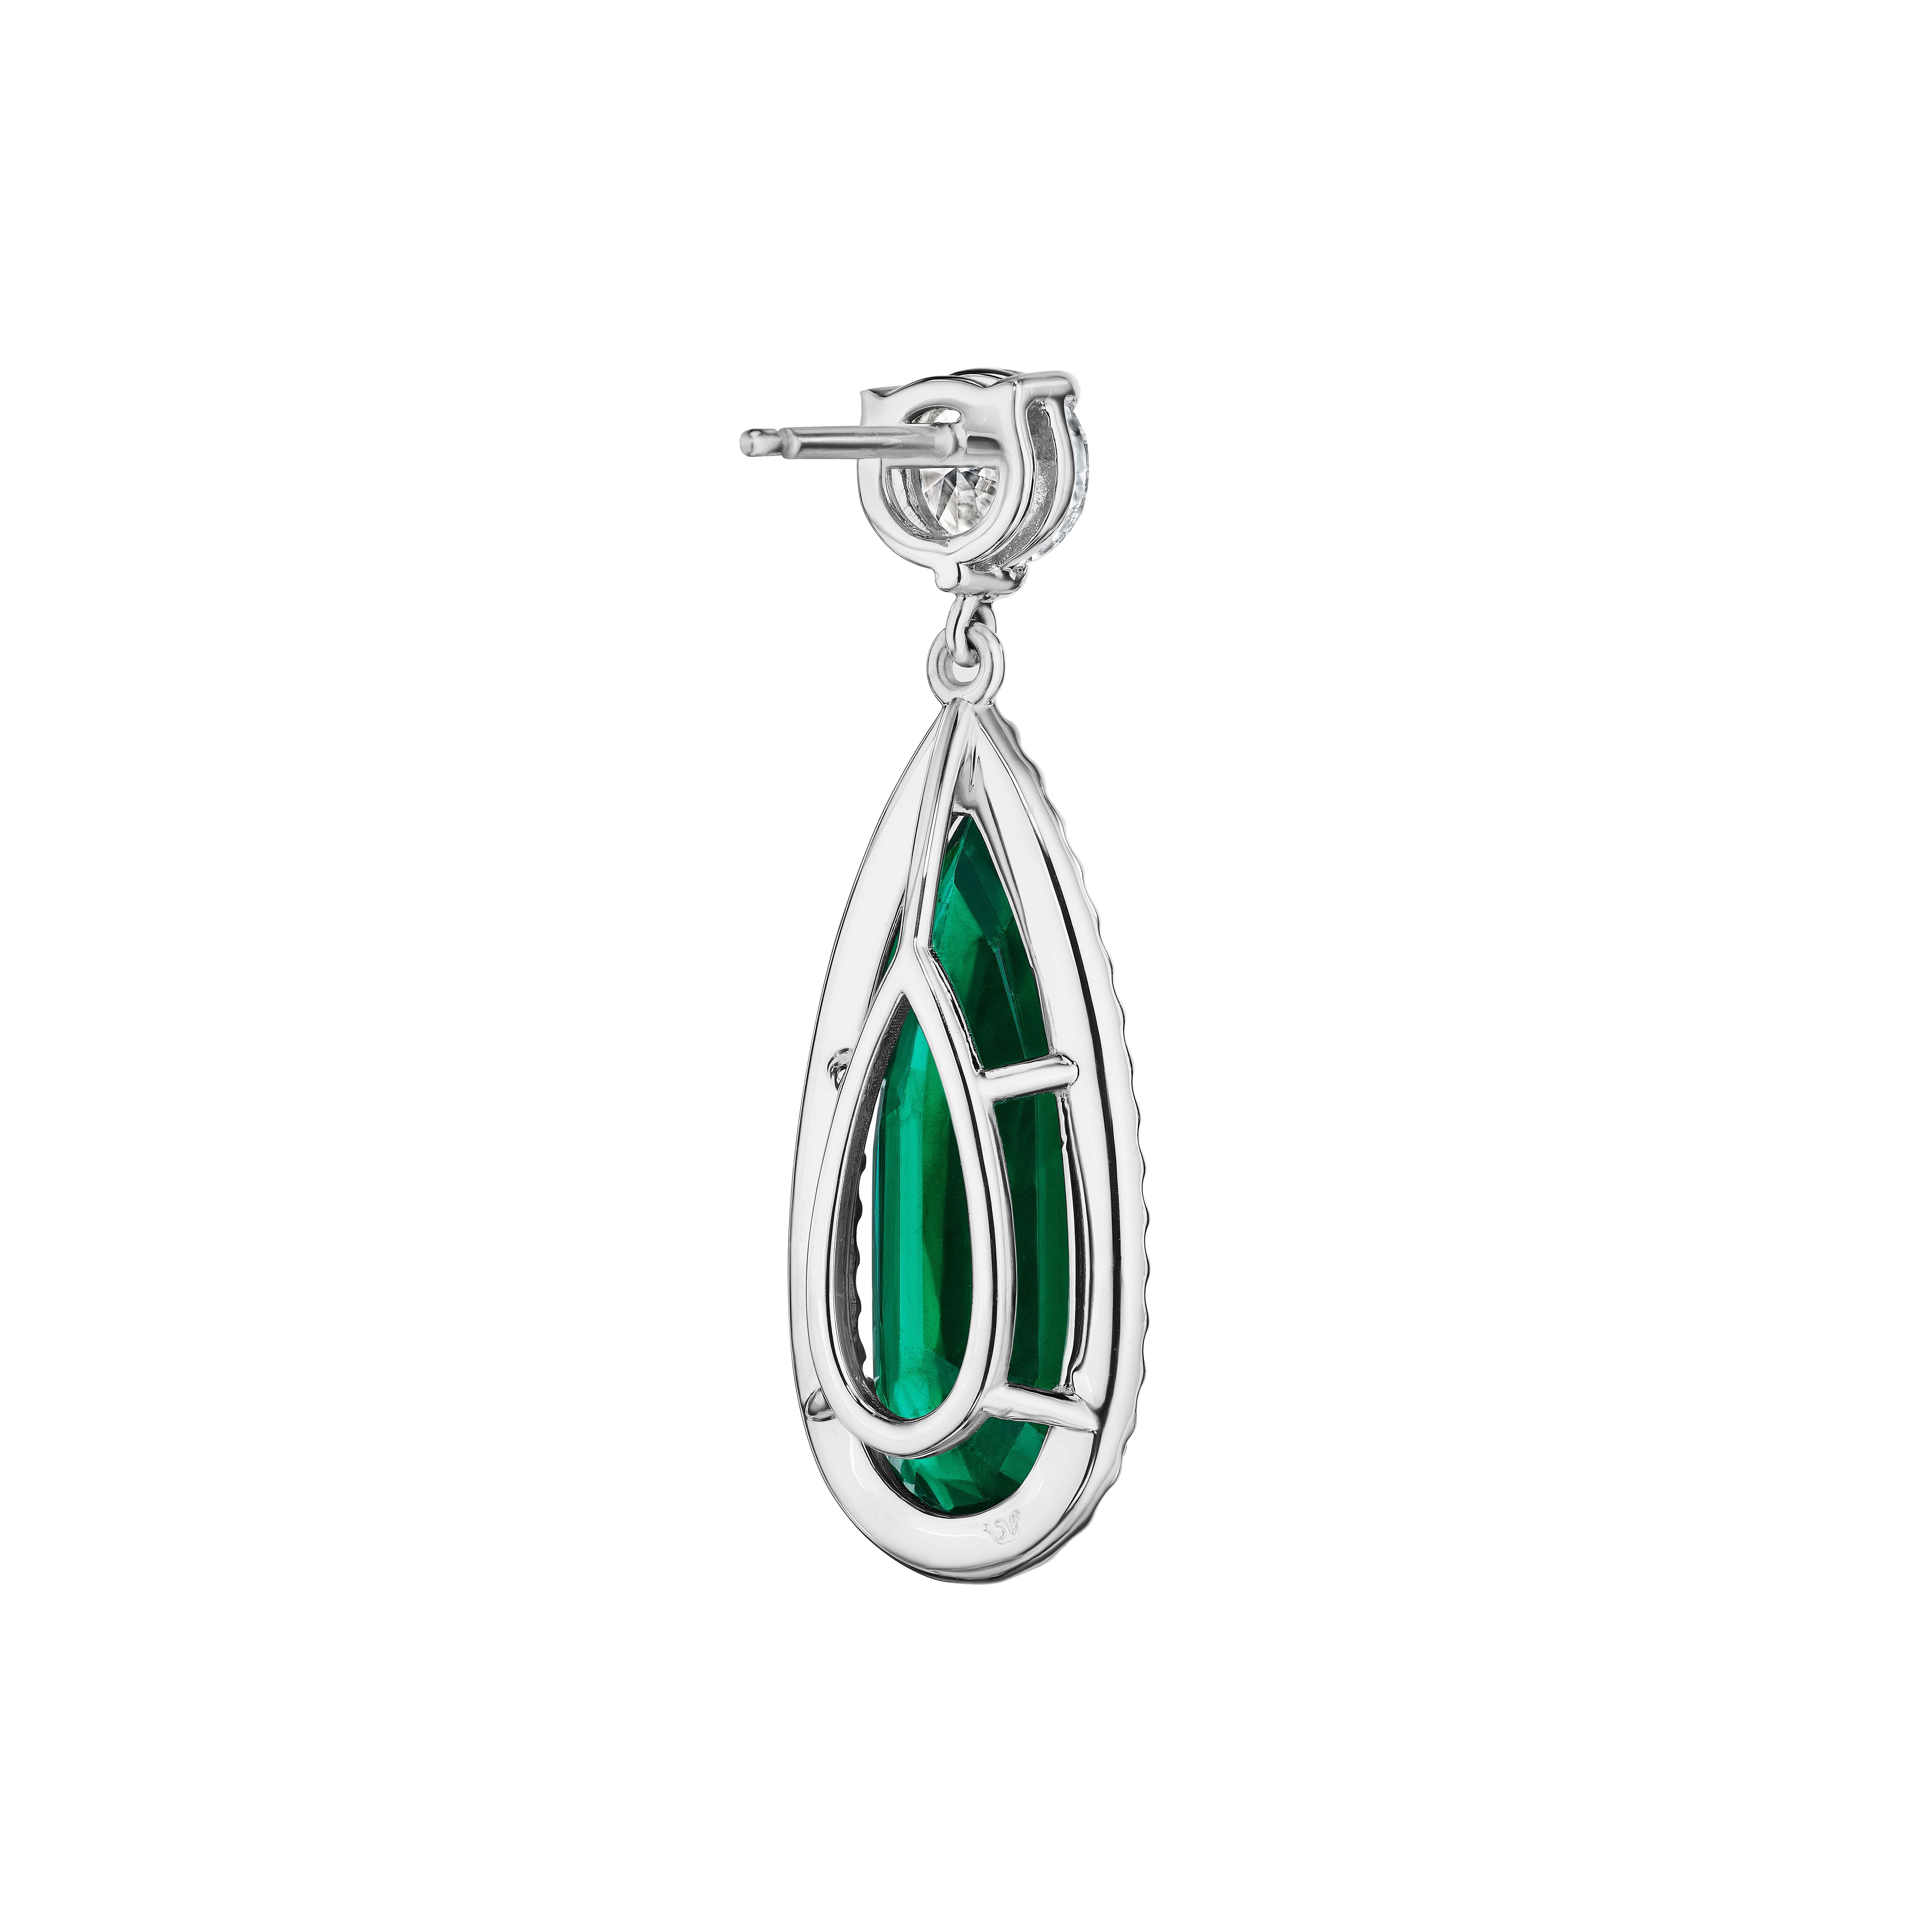 Modern 12.87ct Pear Shape Emerald & Round Diamond Earrings in 18KT White Gold For Sale